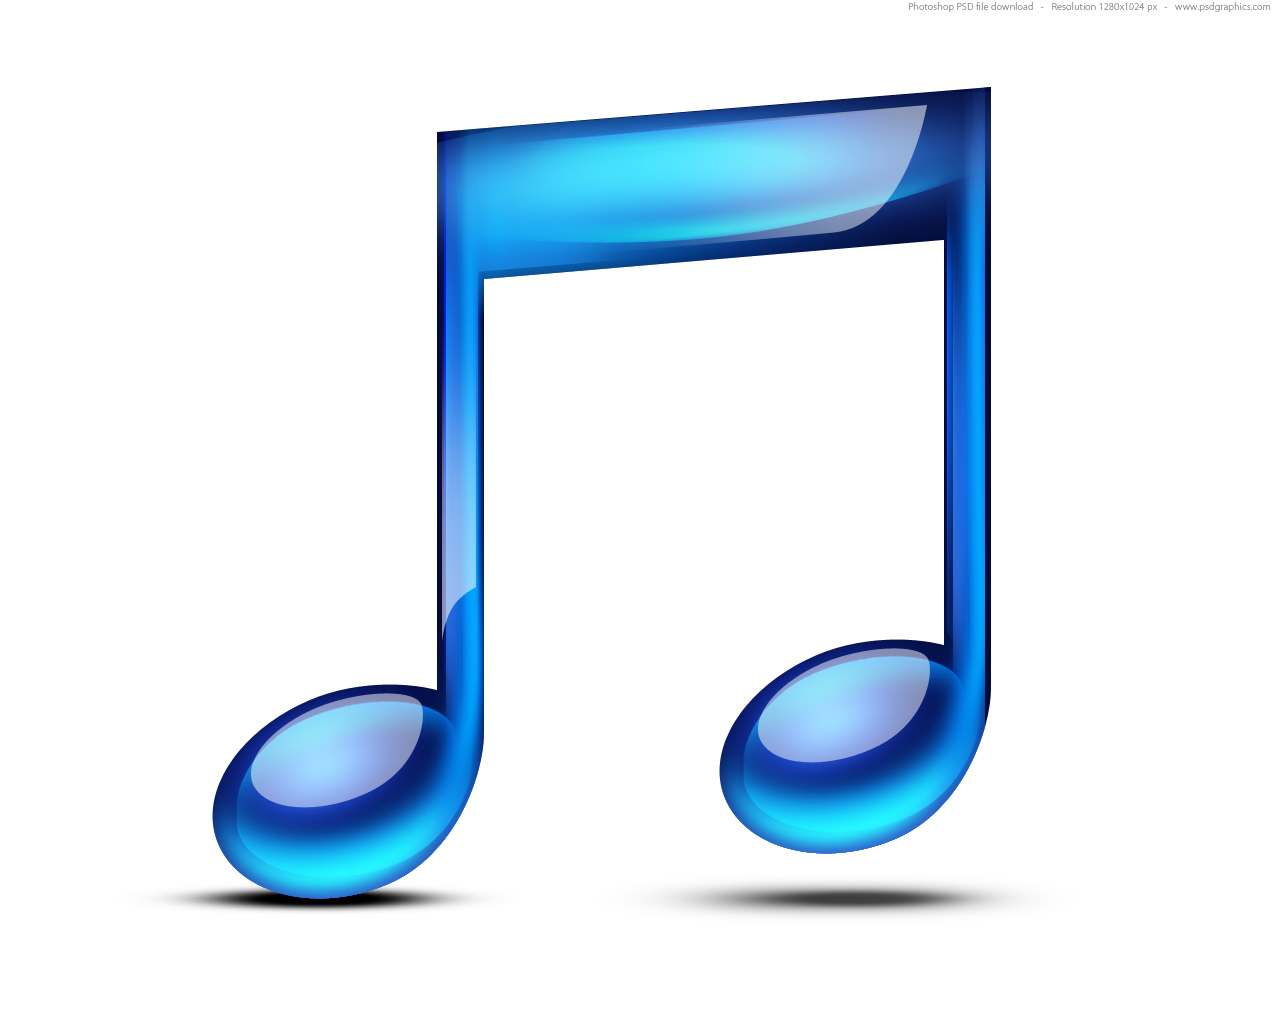 Picture Of A Musical Note Symbol - Clipart library